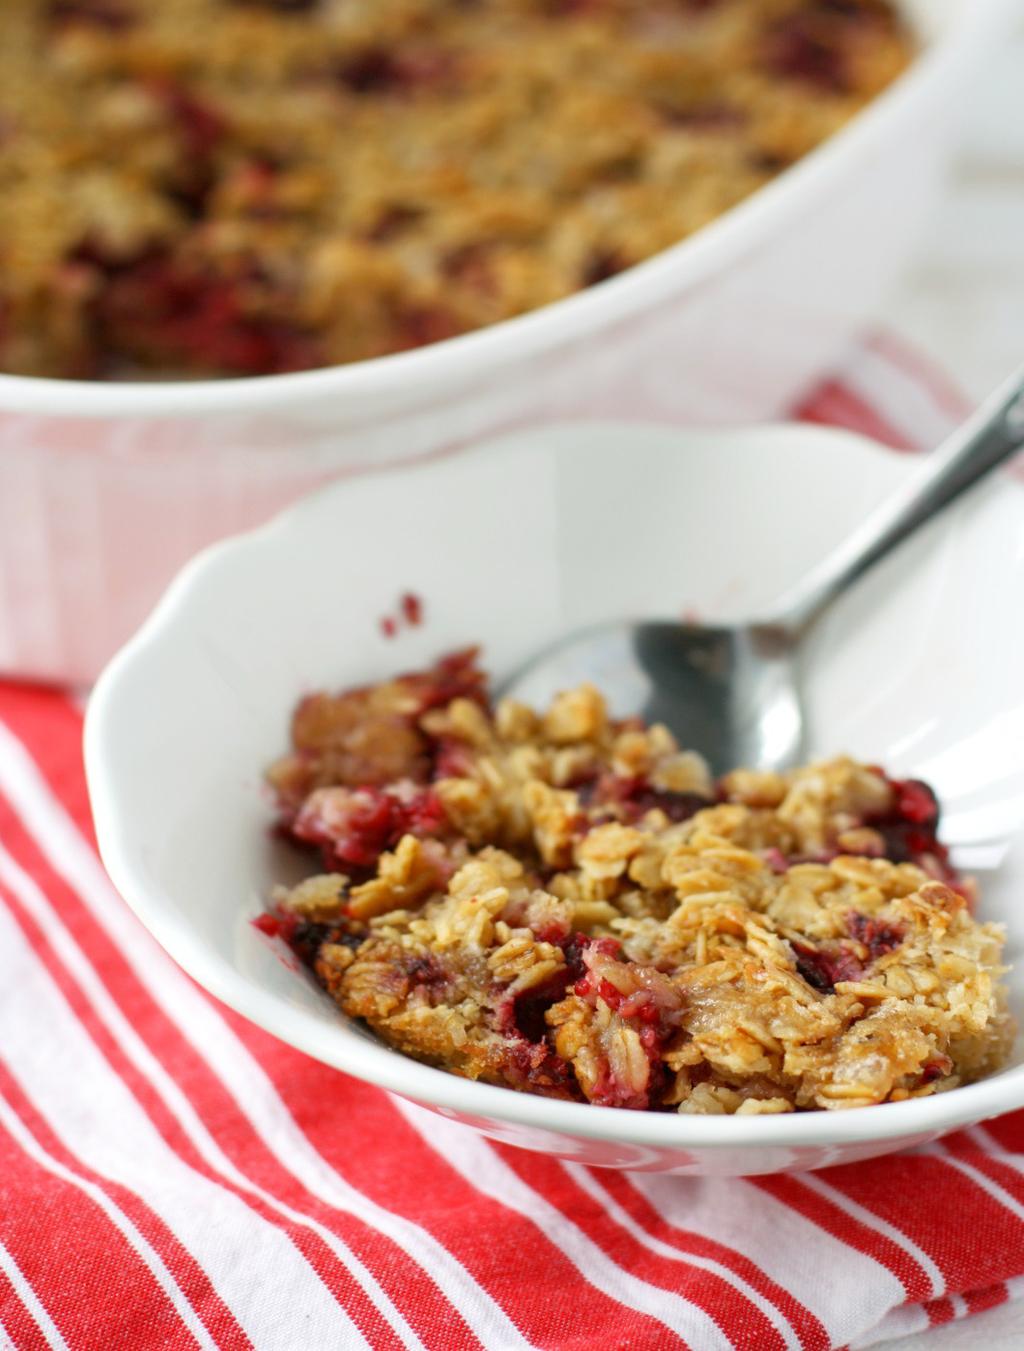 Raspberry Coconut Baked Oatmeal ½ cup vegan buttery spread, melted ½ cup maple syrup 1 teaspoon vanilla extract 2 Tablespoons ground flax seed + 6 Tablespoons water 2 ½ cups gluten free oats ½ cup